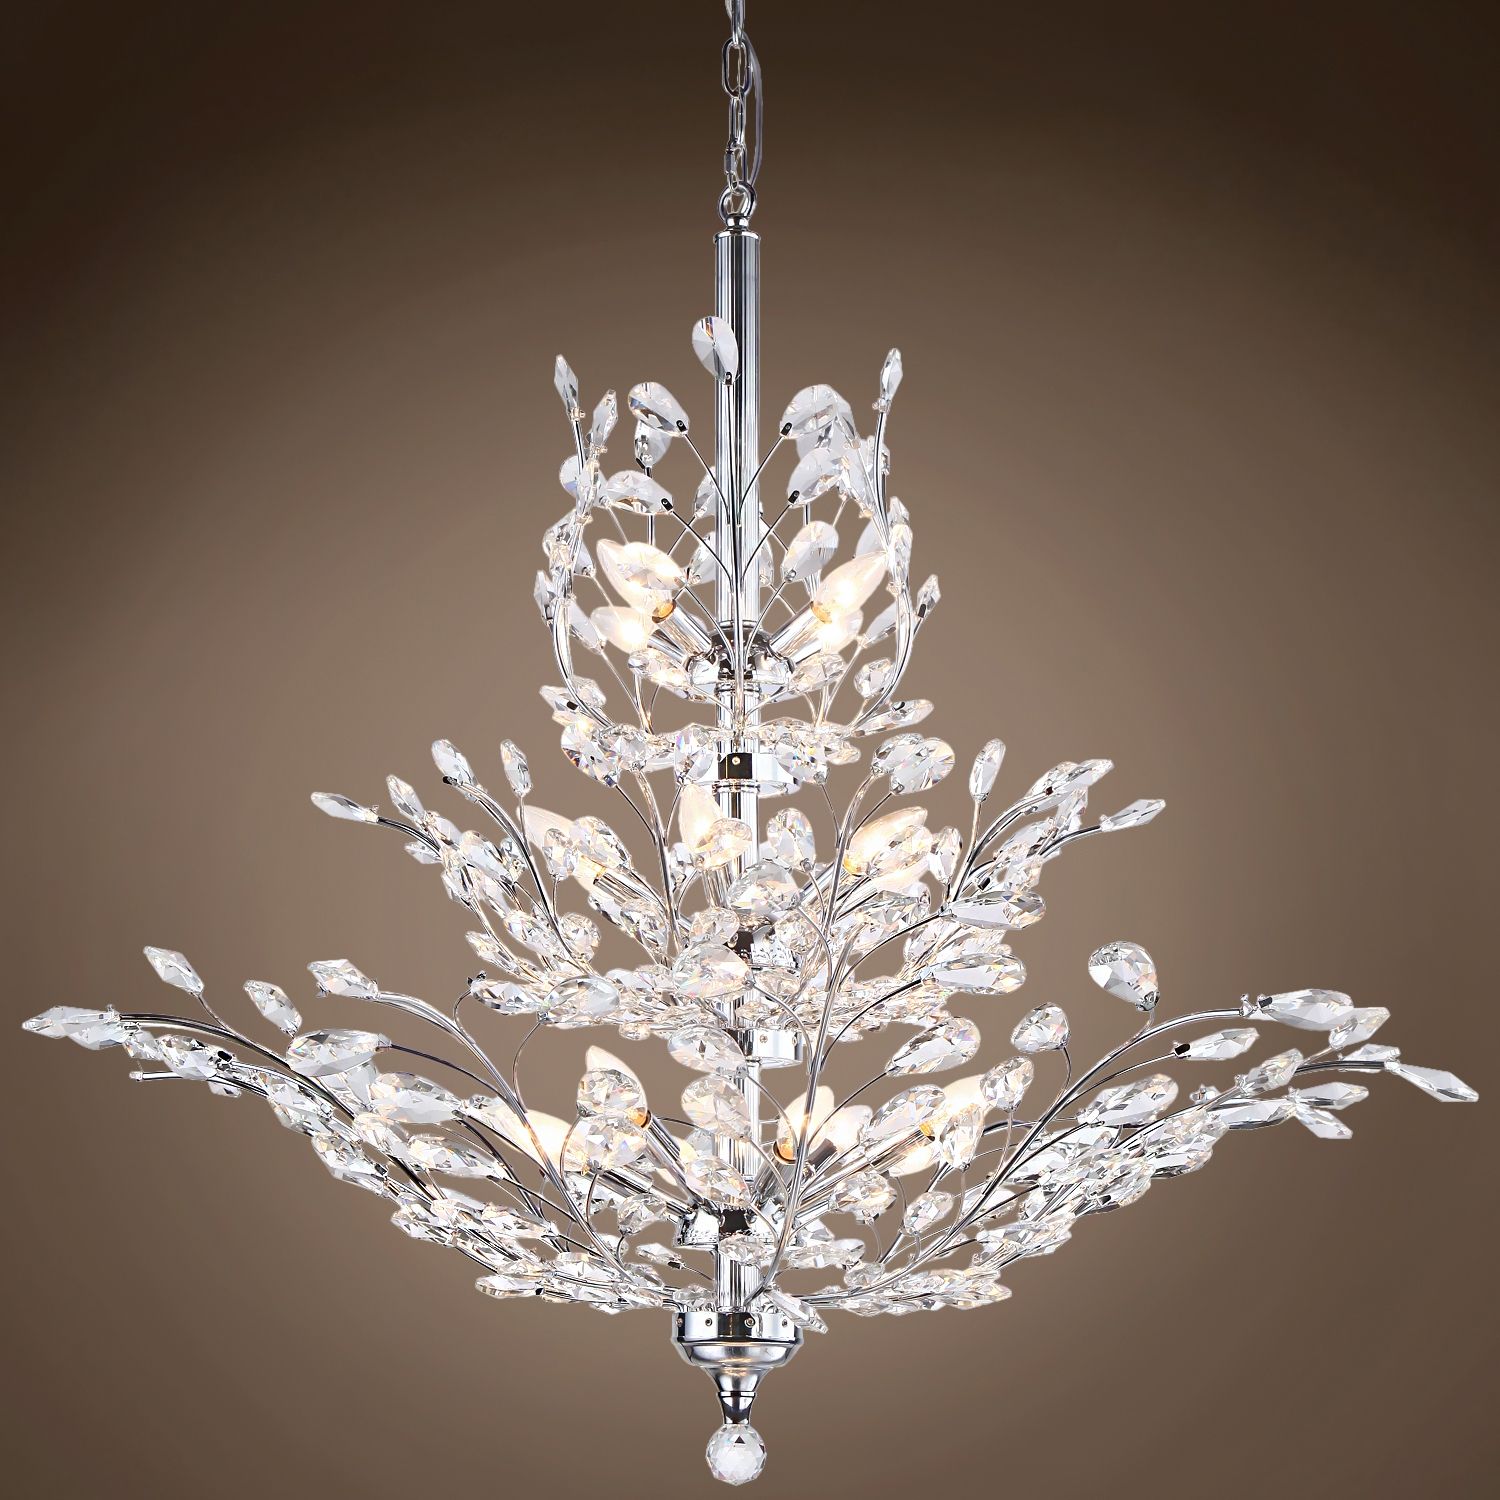 Joshua Marshal 700109 Branch Of Light 13 Light Chrome Chandelier Within Crystal Chrome Chandelier (View 11 of 15)